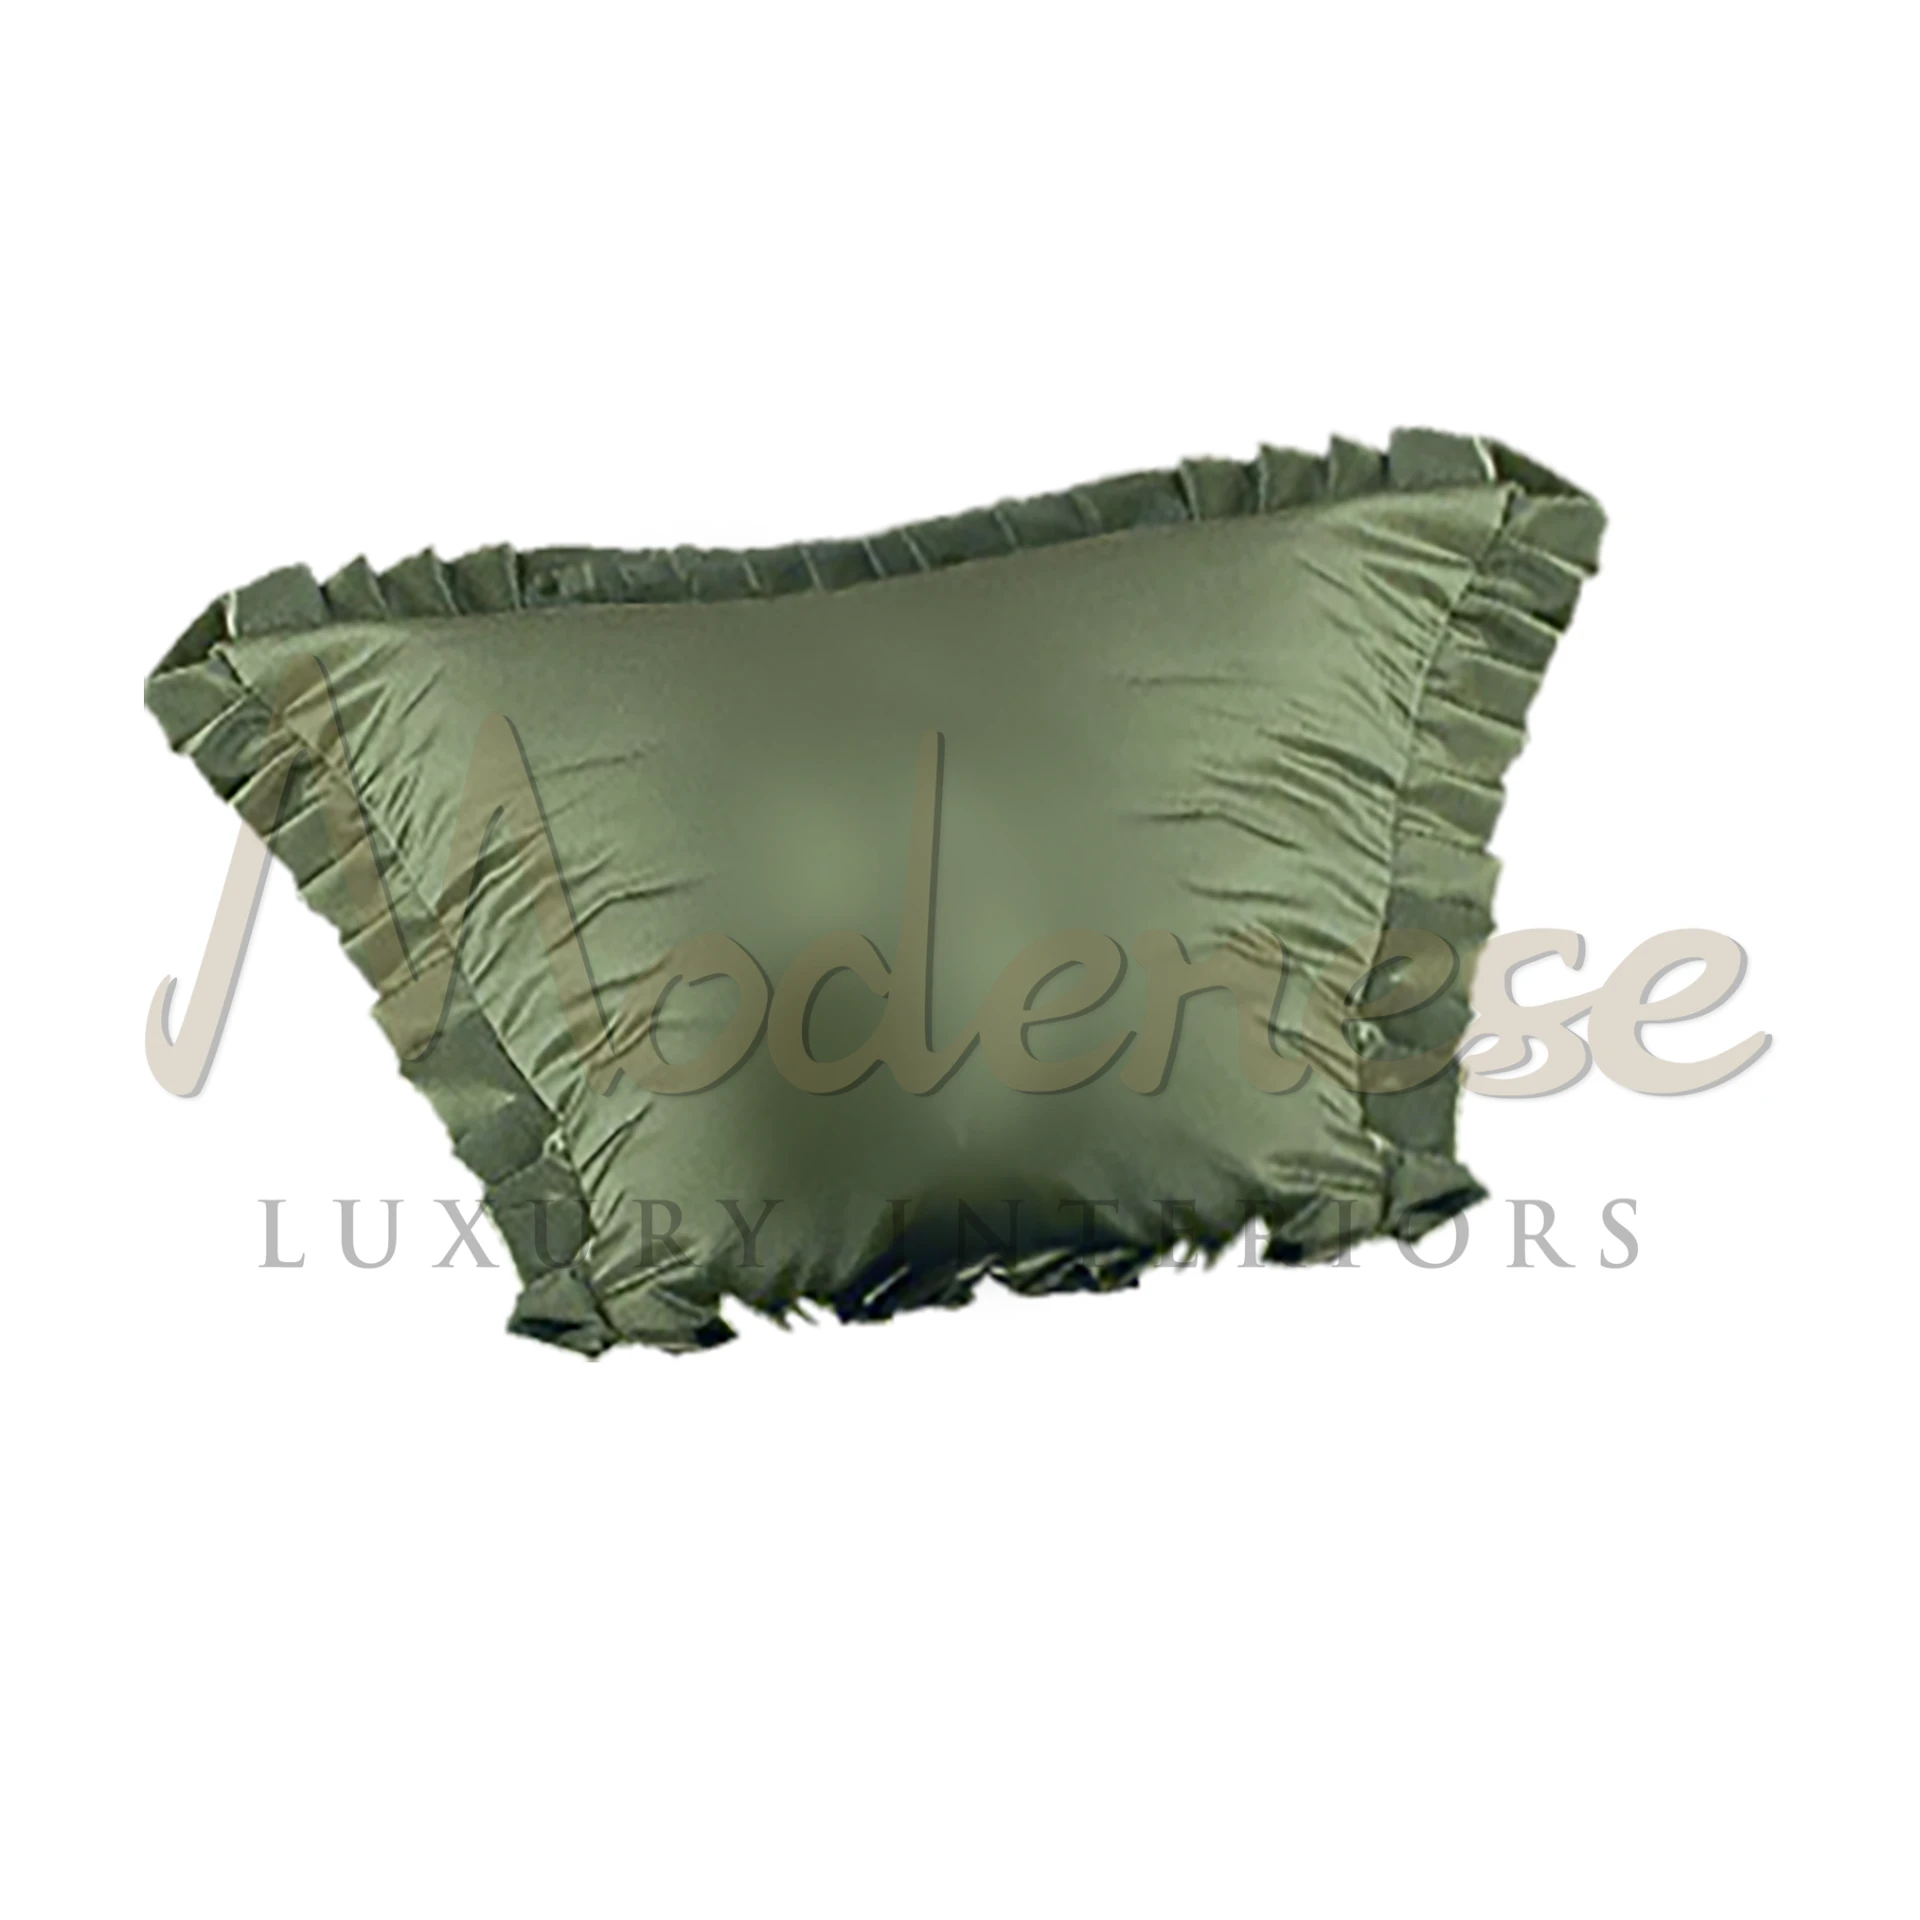 Classical Pillow in an elegant setting, showcasing its high-quality materials and plush filling for ultimate comfort and luxury.